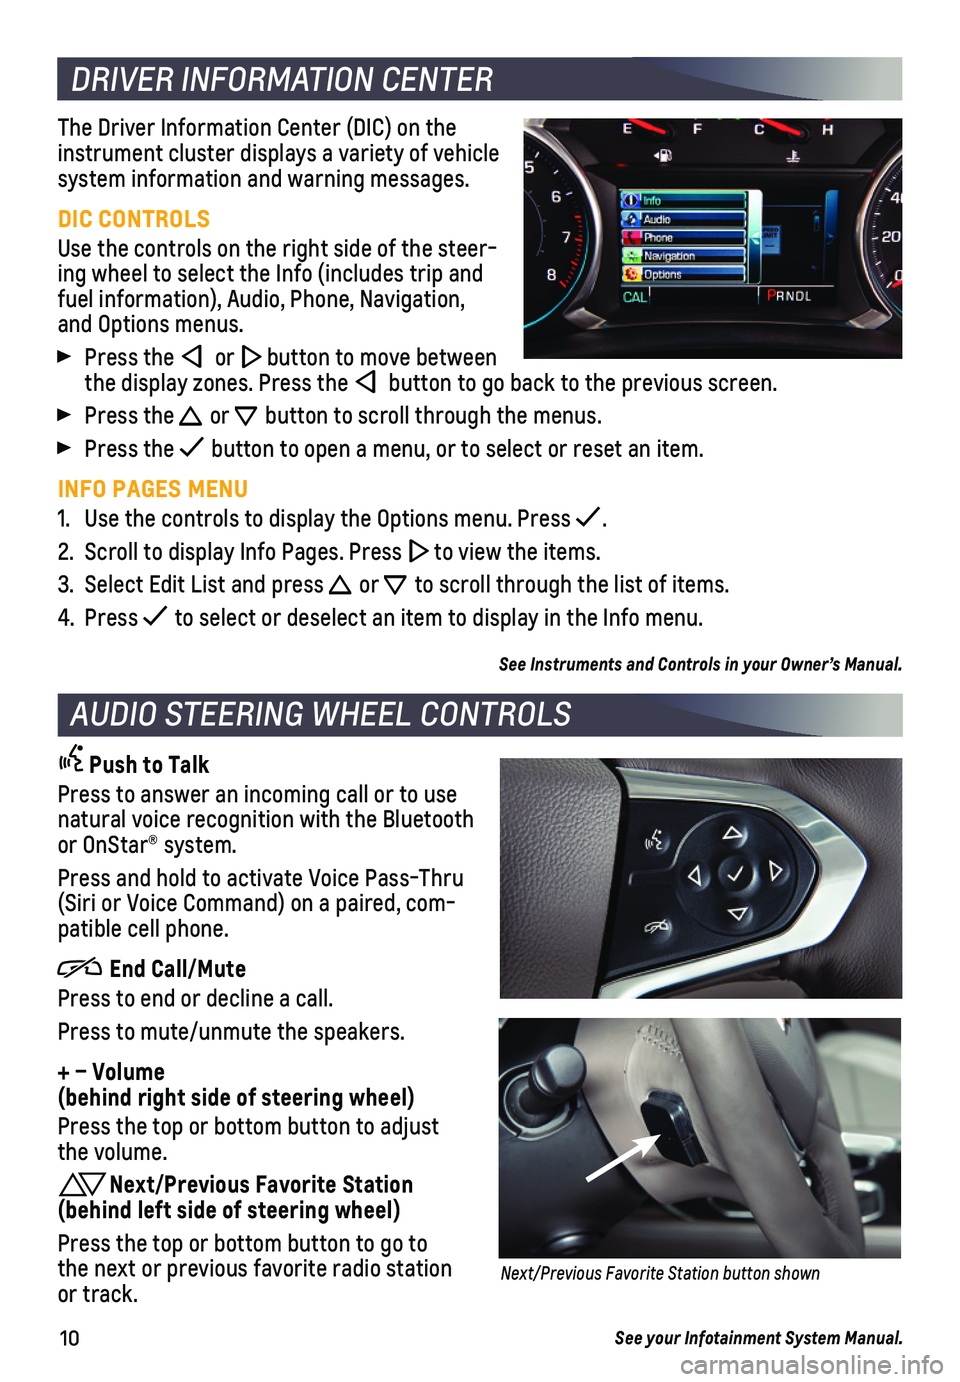 CHEVROLET TRAVERSE 2019  Get To Know Guide 10
DRIVER INFORMATION CENTER
The Driver Information Center (DIC) on the instrument cluster displays a variety of vehicle system information and warning messages.
DIC CONTROLS
Use the controls on the r